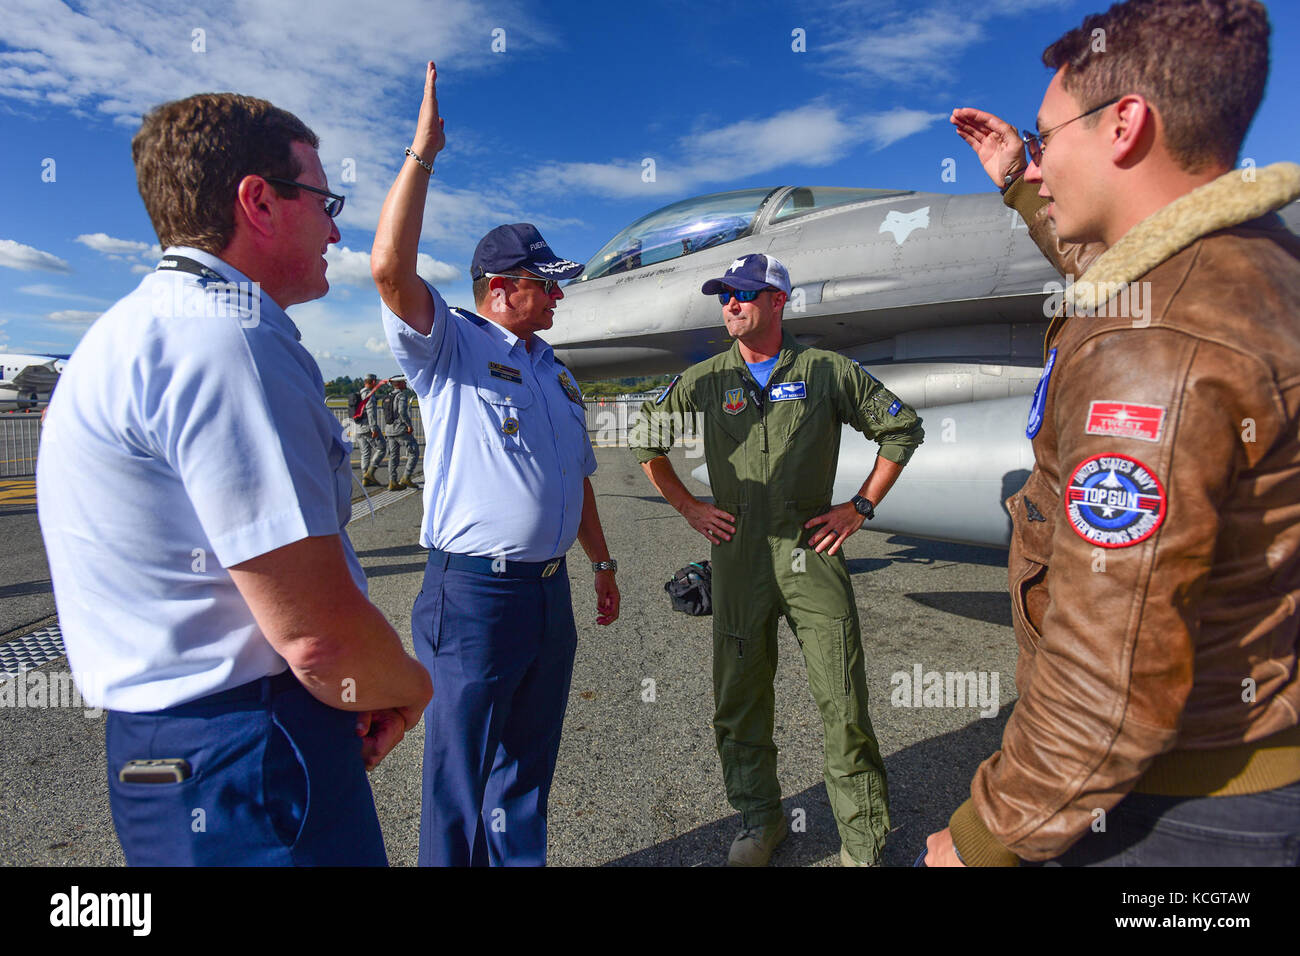 U.S. Air Force Col. Nicholas Gentile, the 169th Fighter Wing Commander, left, and Lt. Col Jeff Beckham, a fighter pilot assigned to the 157th Fighter Squadron right, speak with Gen. Carlos Bueno, the Chief of the Colombian Air Force, center, at José María Córdova International Airport during F-AIR 2017 in Rionegro, Colombia, July 13, 2017. United States military participation in the air show provides an opportunity to strengthen our military-to-military relationships with regional partners and provides the opportunity to meet with our Colombian air force counterparts and facilitate interoperab Stock Photo